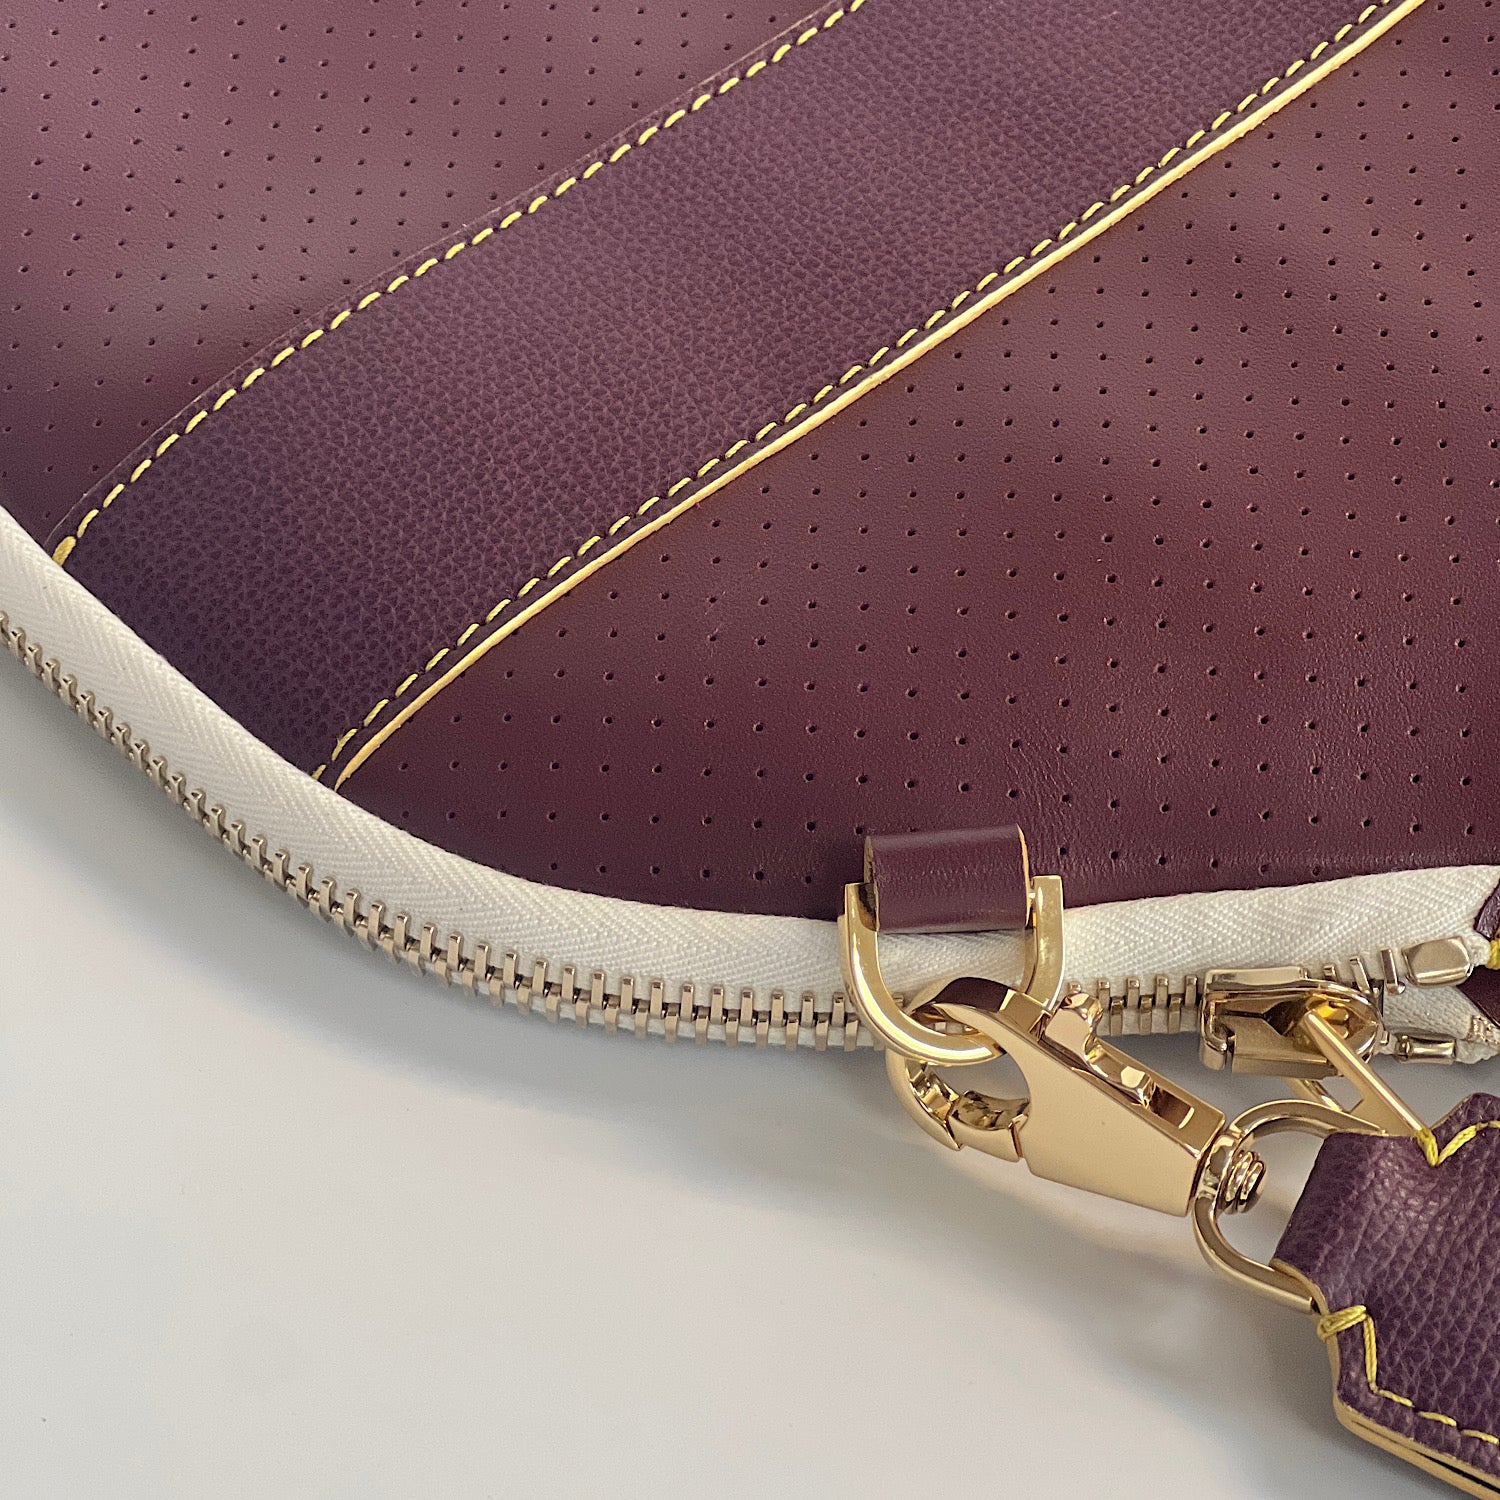 "The Addict" Leather Pickleball Bag - Cardinal w/Gold